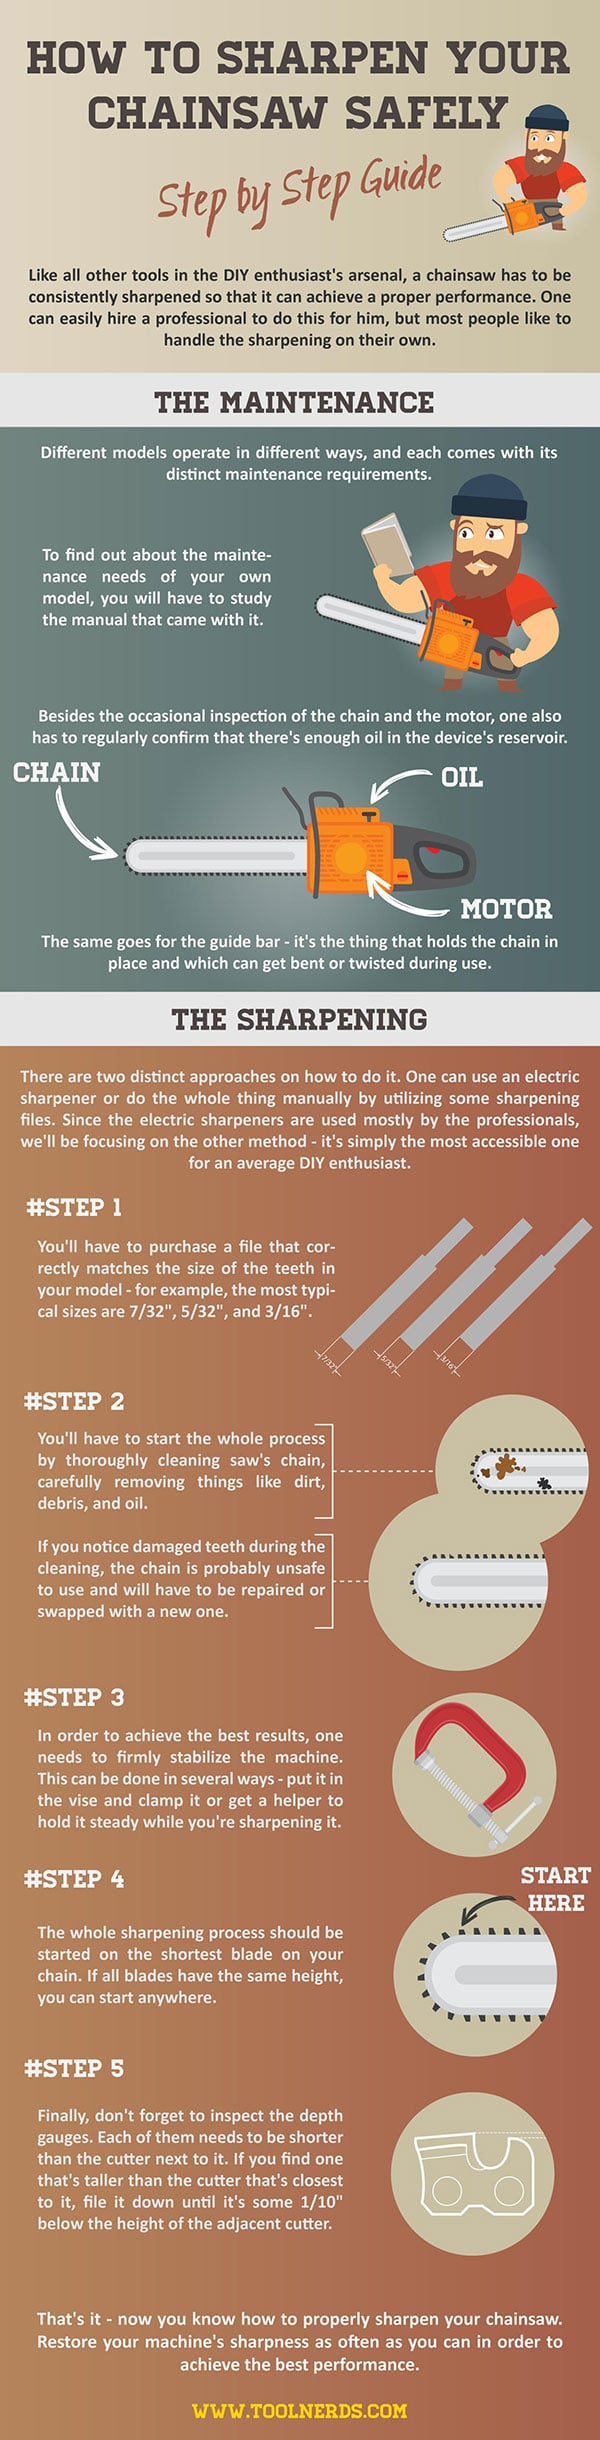 How to Sharpen Your Chainsaw Safely - Step by Step Guide